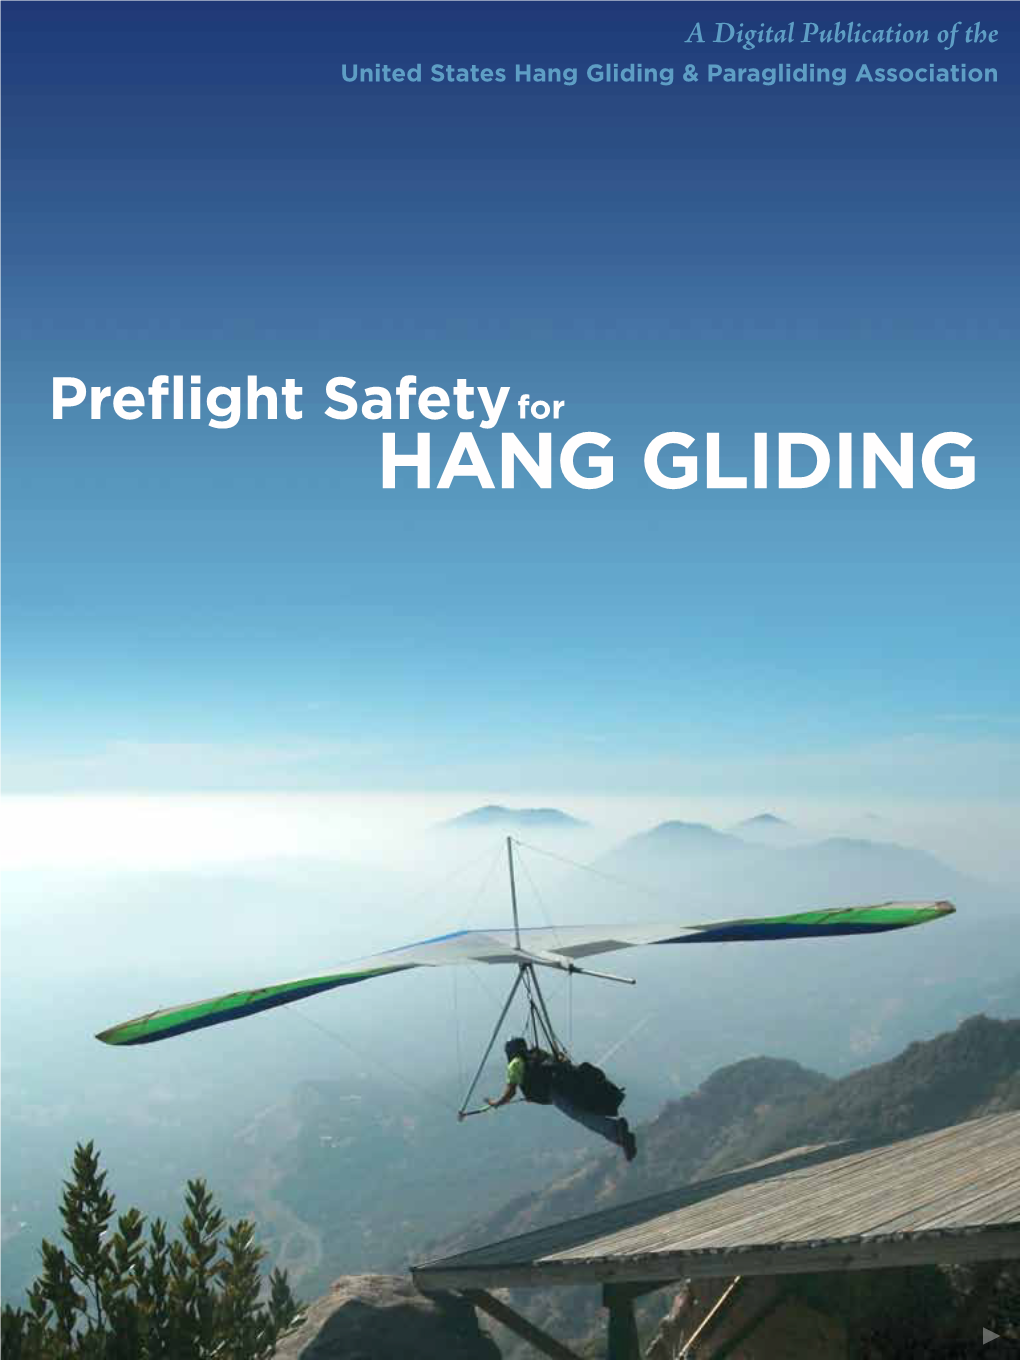 Preflight Safety for HANG GLIDING HOST | Paul Voight Making This Safety Film Was a Fun, Swipe to See Paul Voight’S View High Over Challenging Project